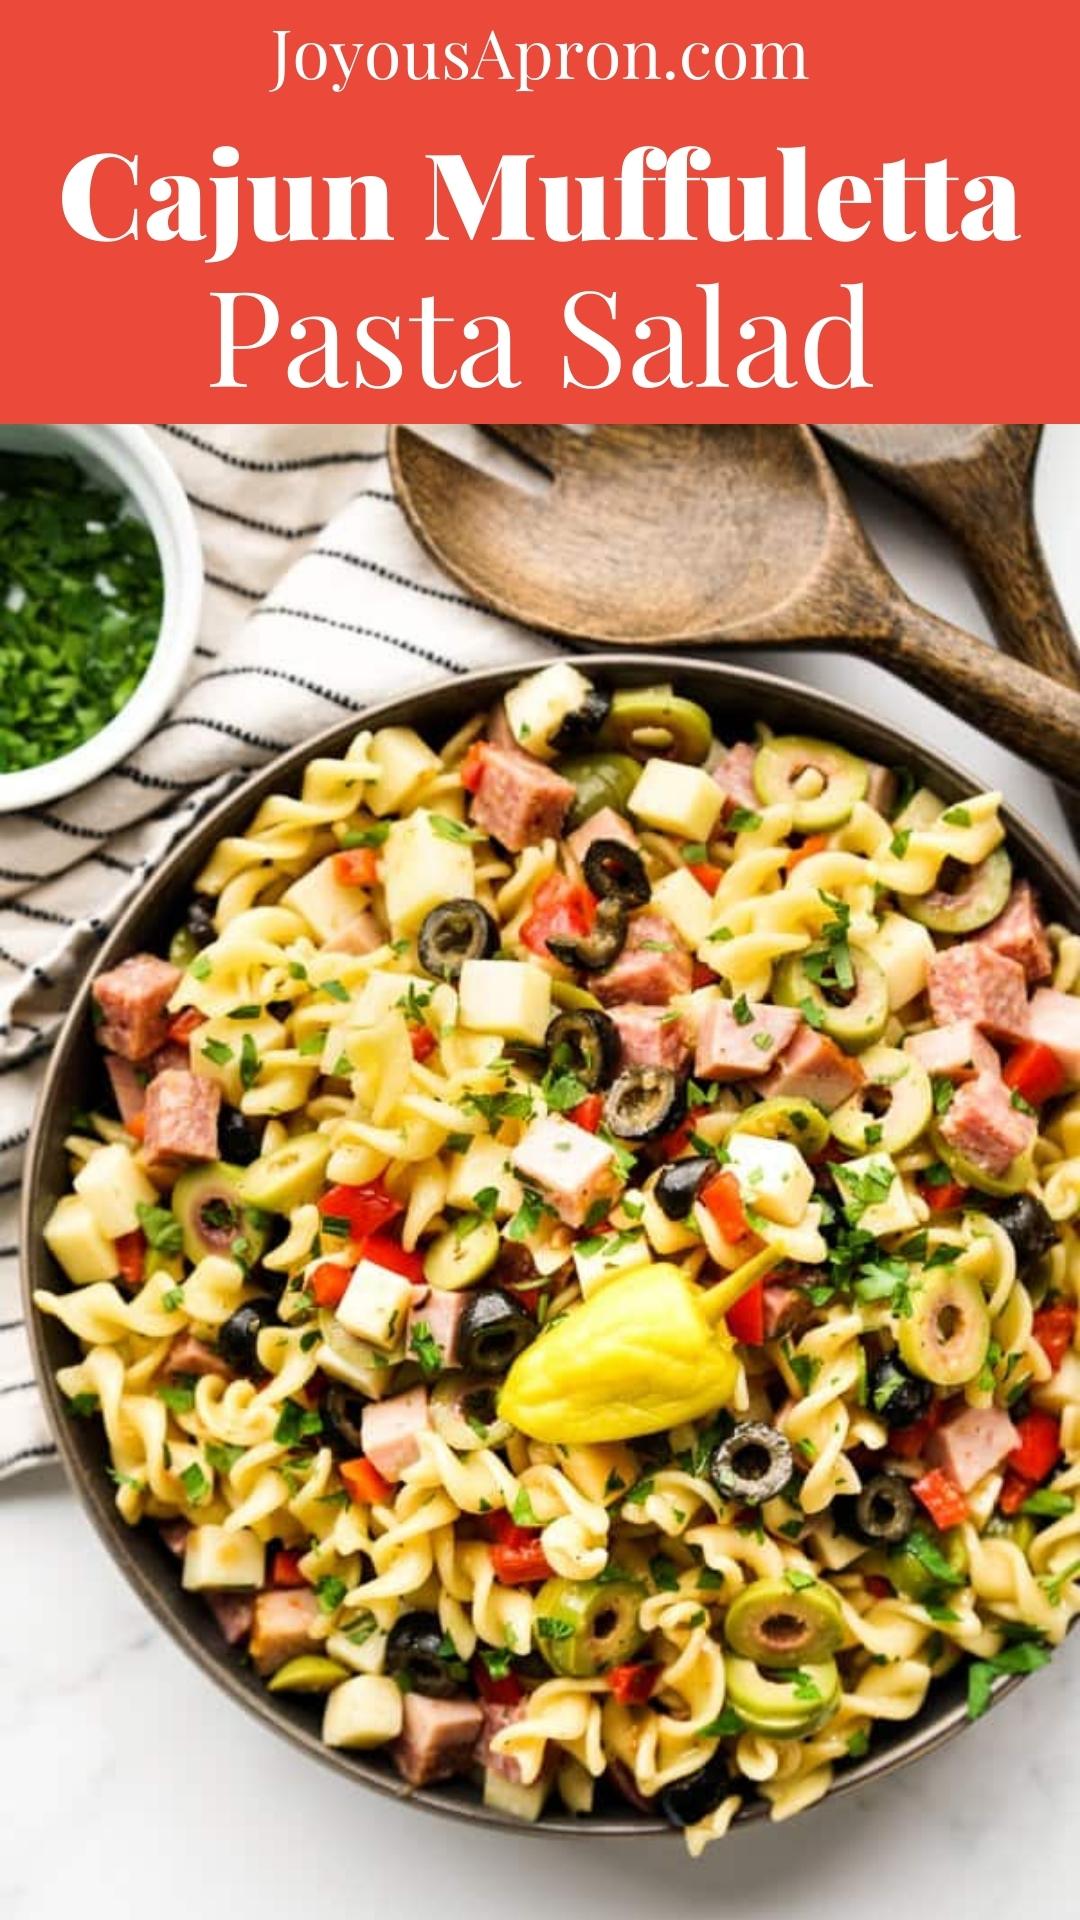 Muffuletta Pasta Salad - classic Cajun Muffuletta sandwich in pasta salad form! Lots of olives, ham, salami, cheese, red bell peppers tossed in a tangy Cajun-style Italian dressing. Perfect side dish for cookout and bbq's. via @joyousapron